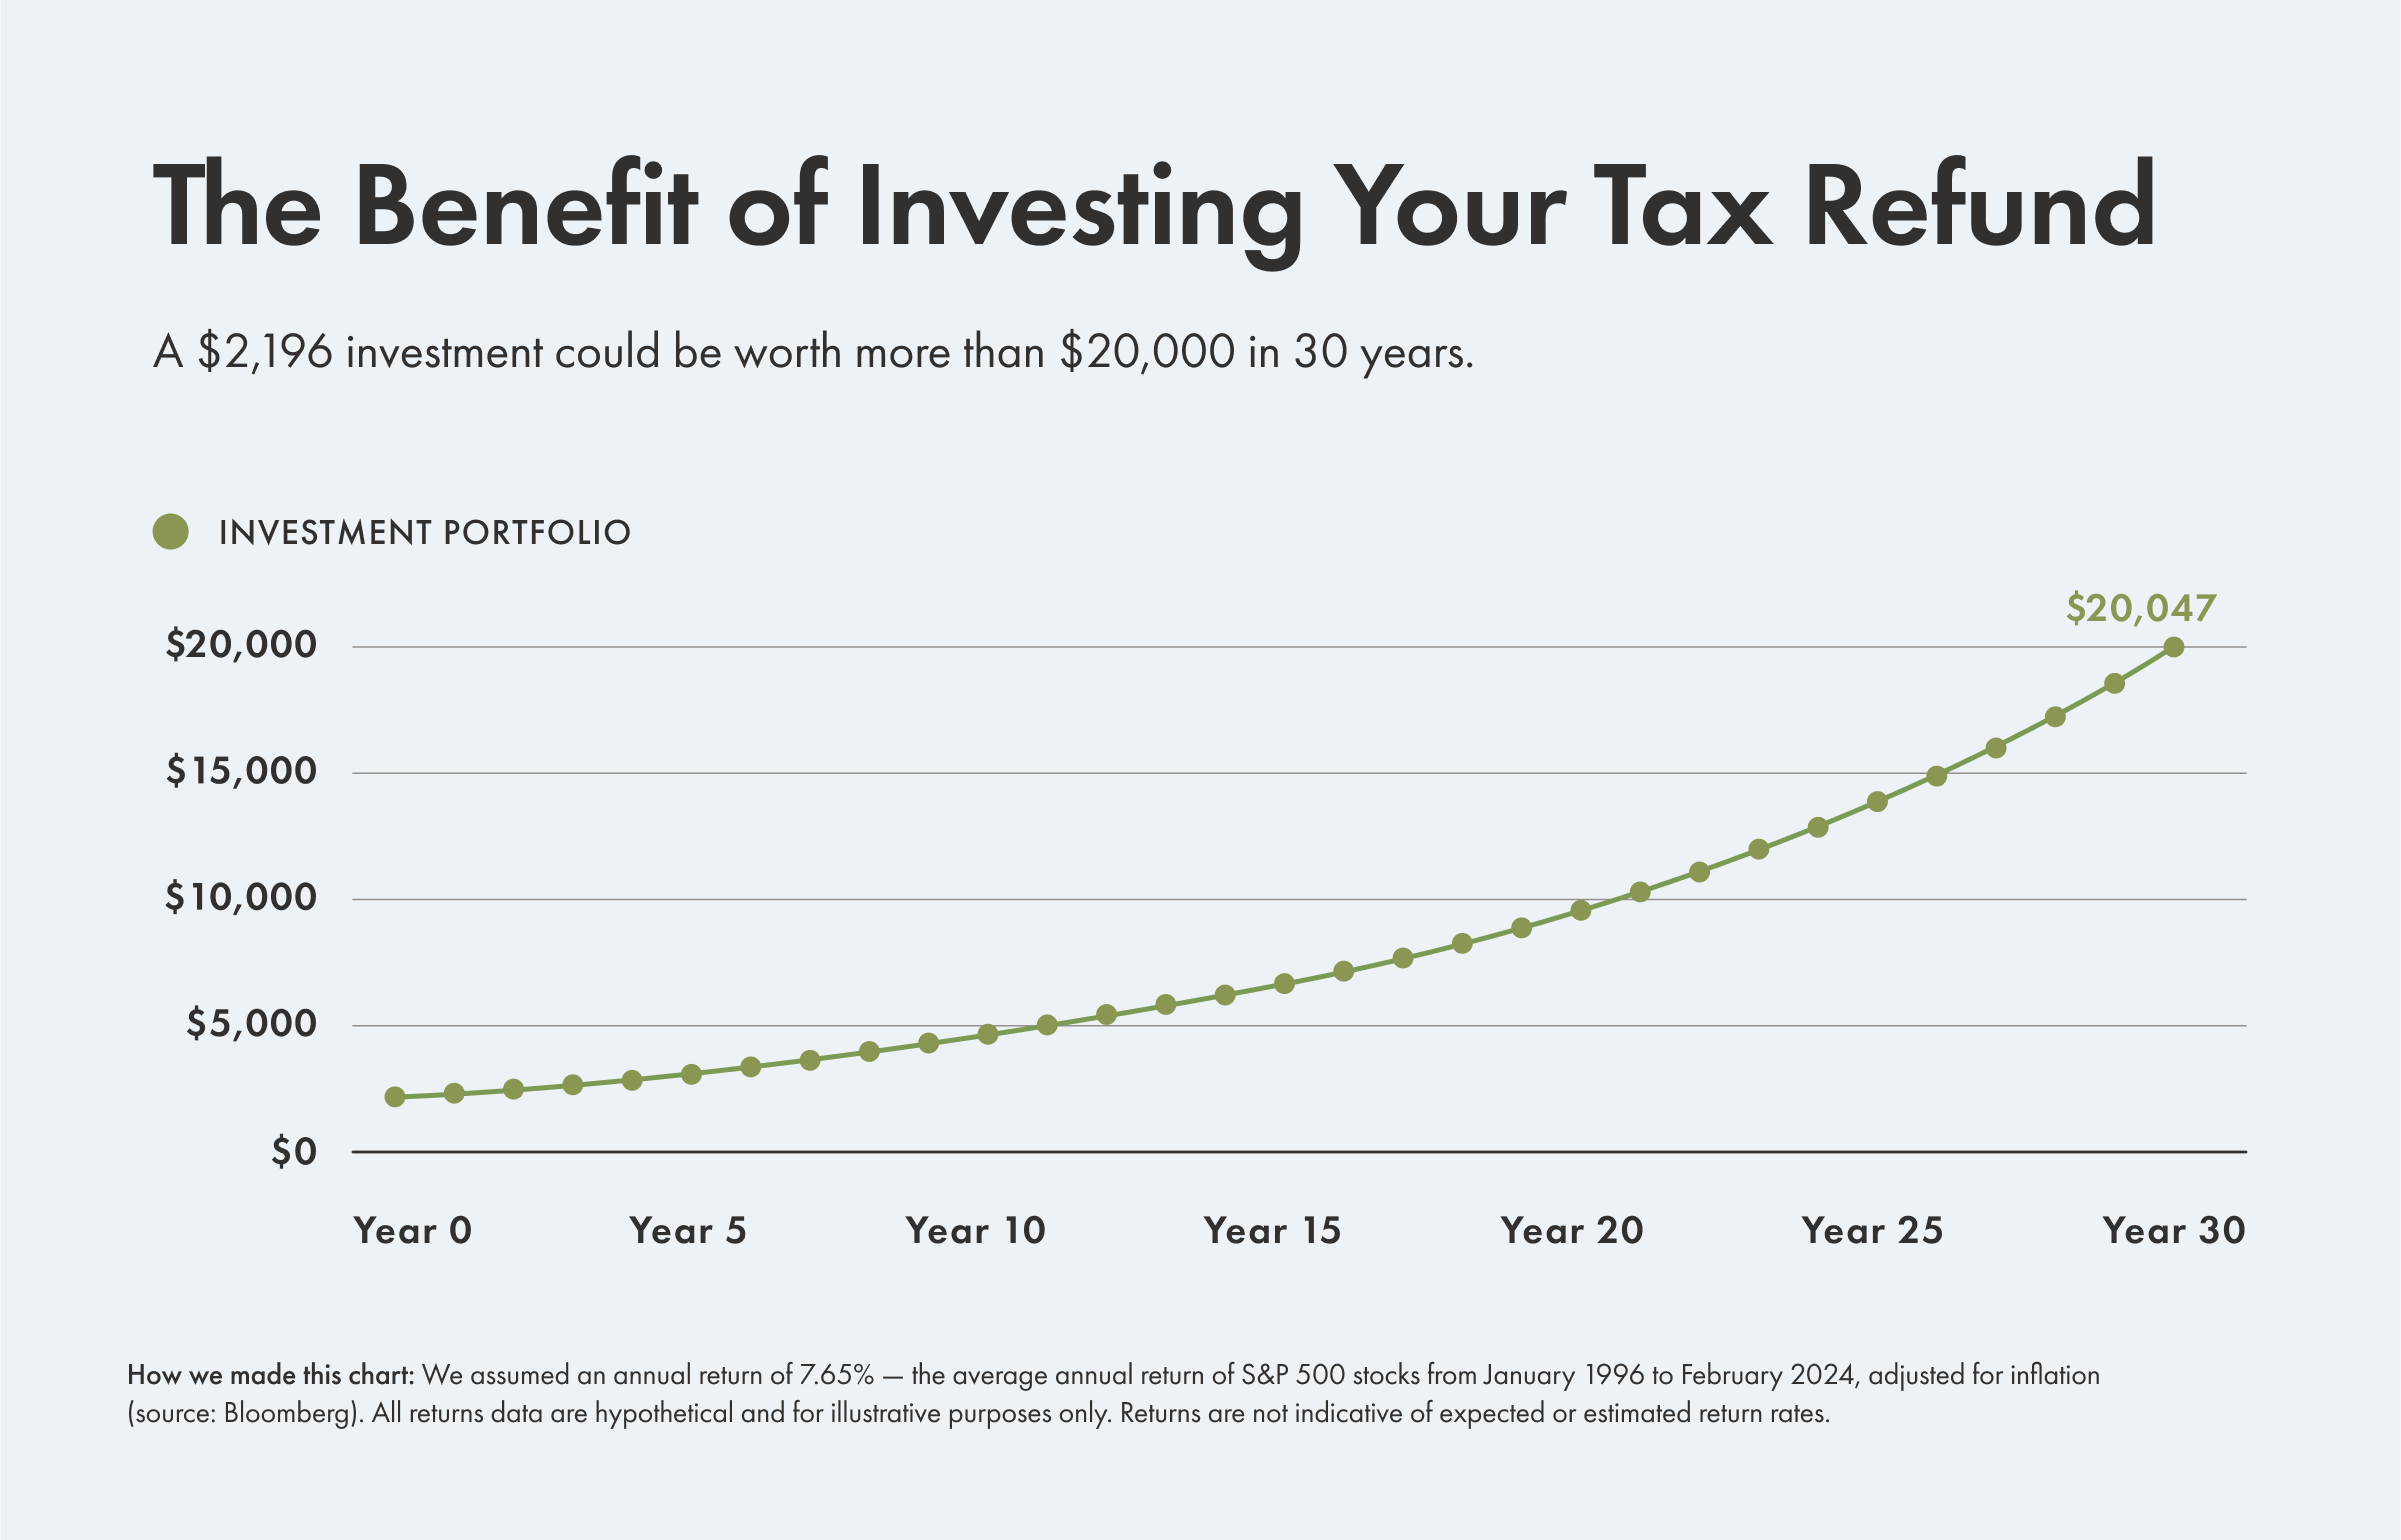 Investing your tax refund can lead to a lot more growth than putting it in a chequing account.